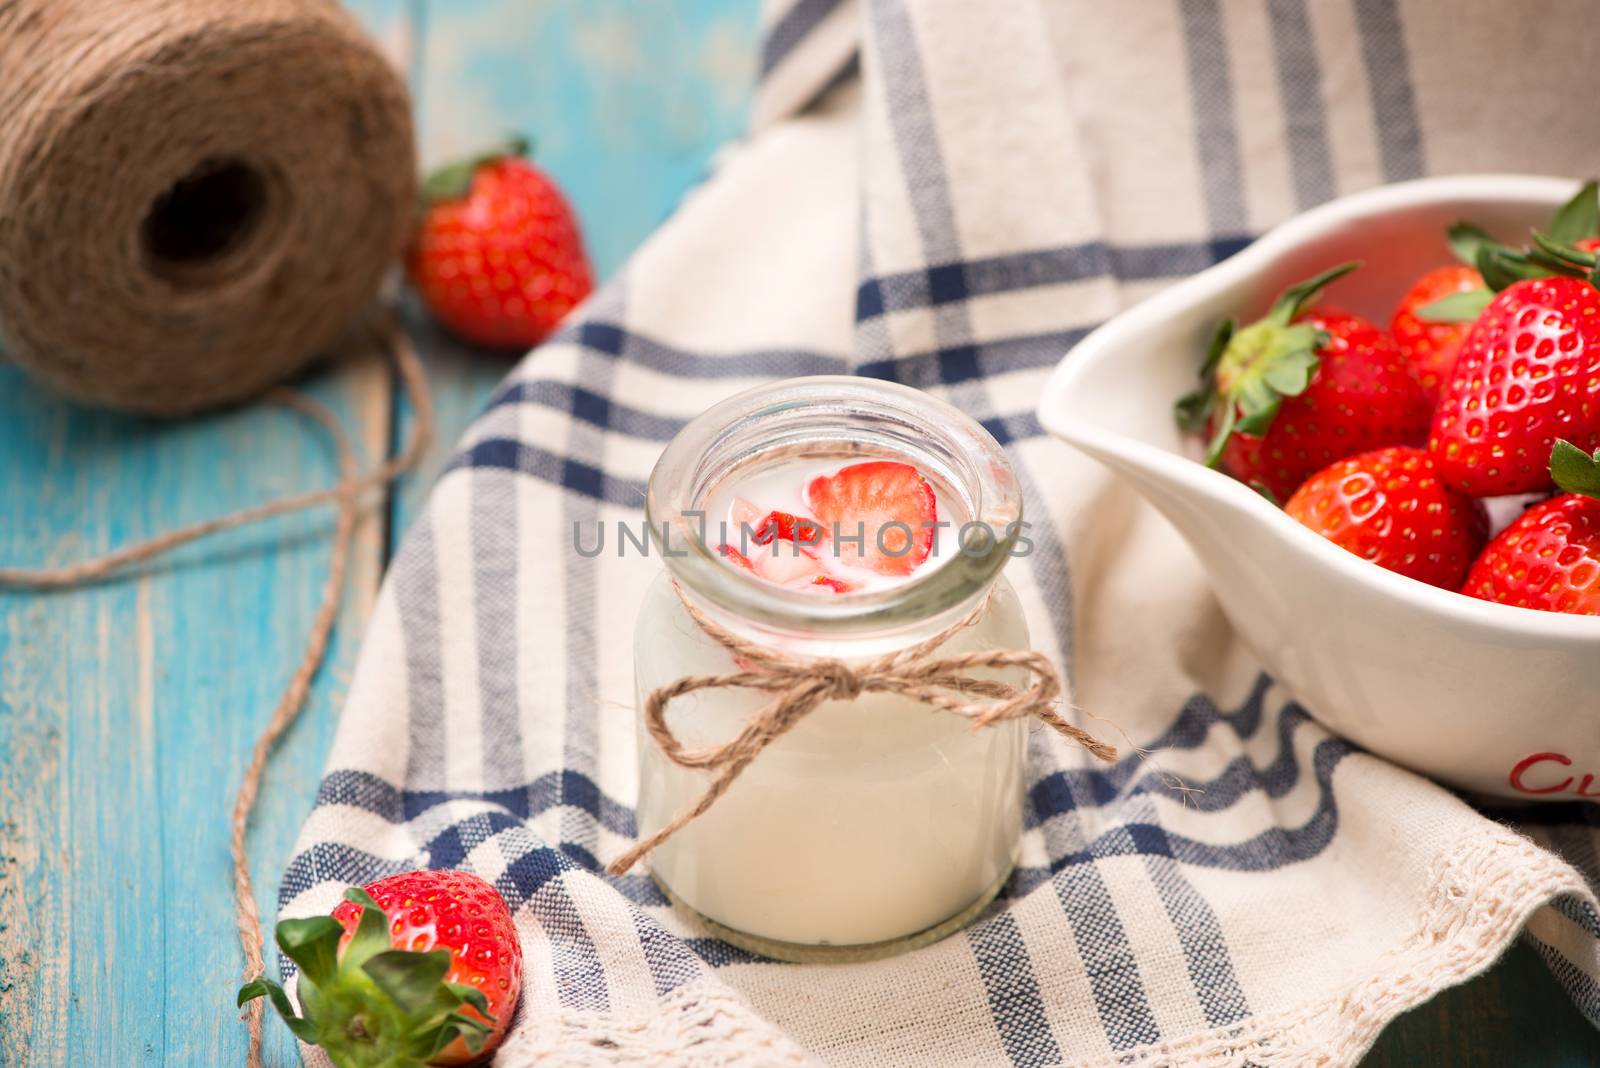 Strawberry Yoghurt. Healthy food with Strawberries and yoghurt b by makidotvn